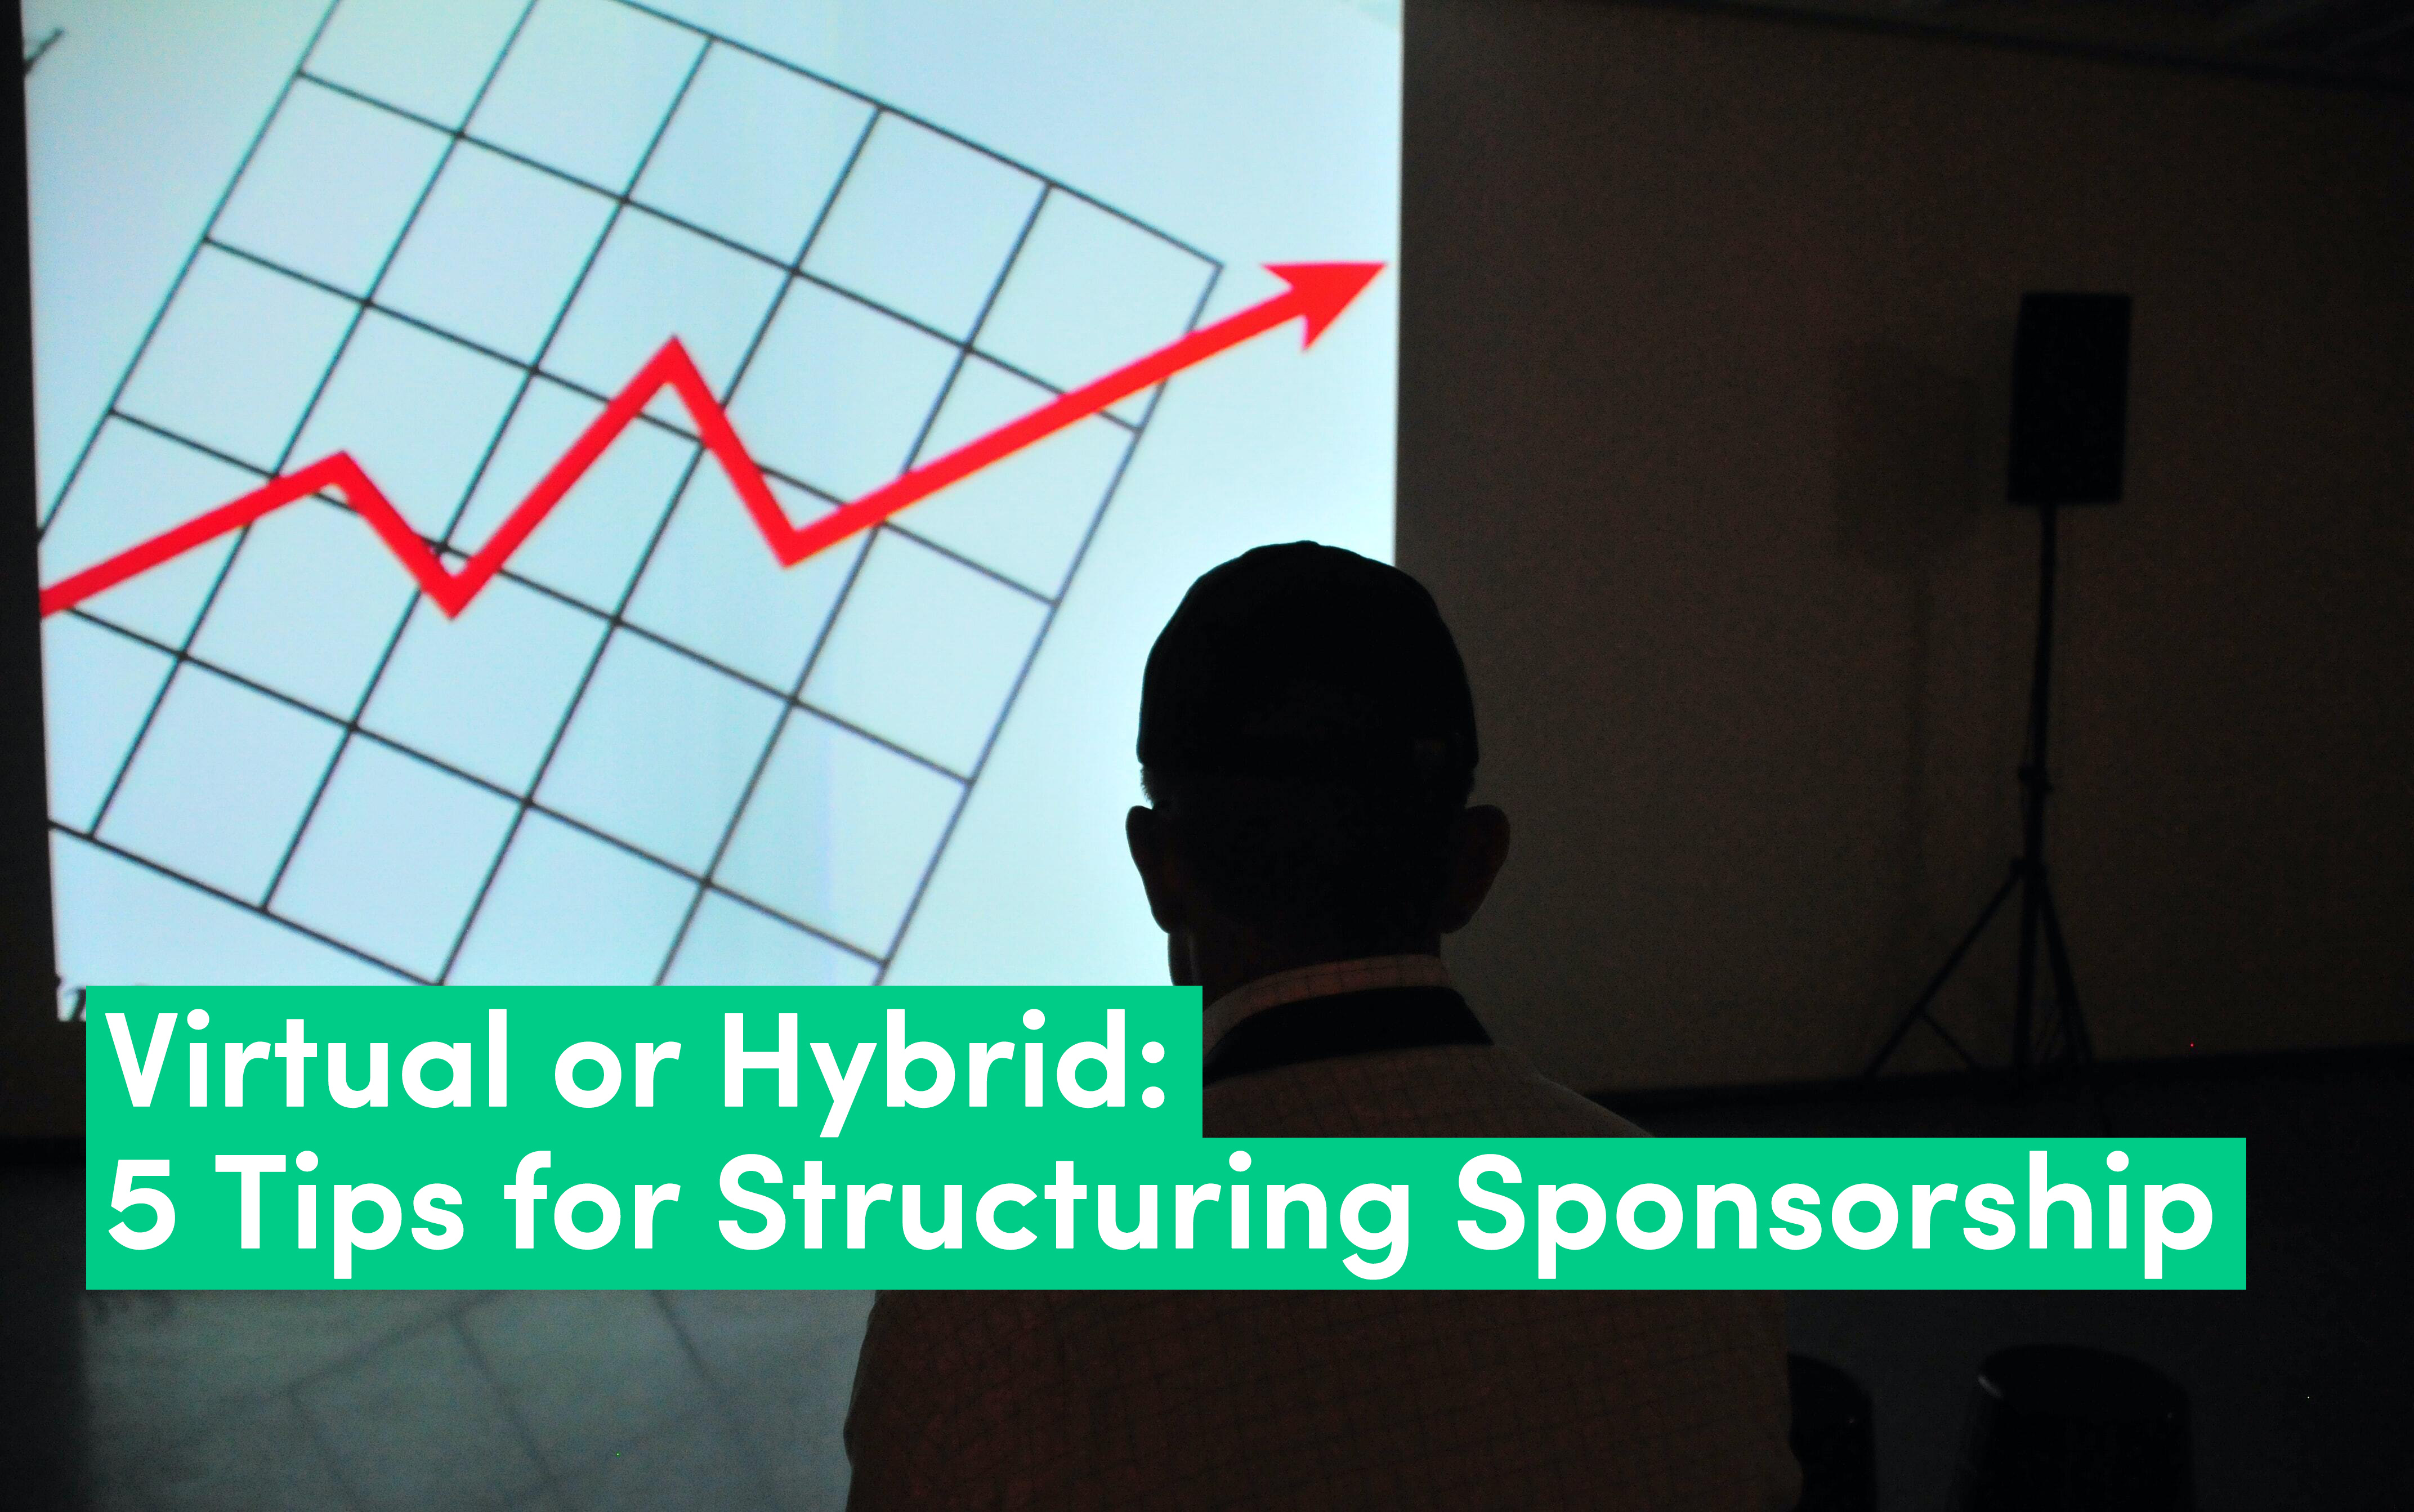 Virtual or Hybrid: 5 Tips for Structuring Sponsorship